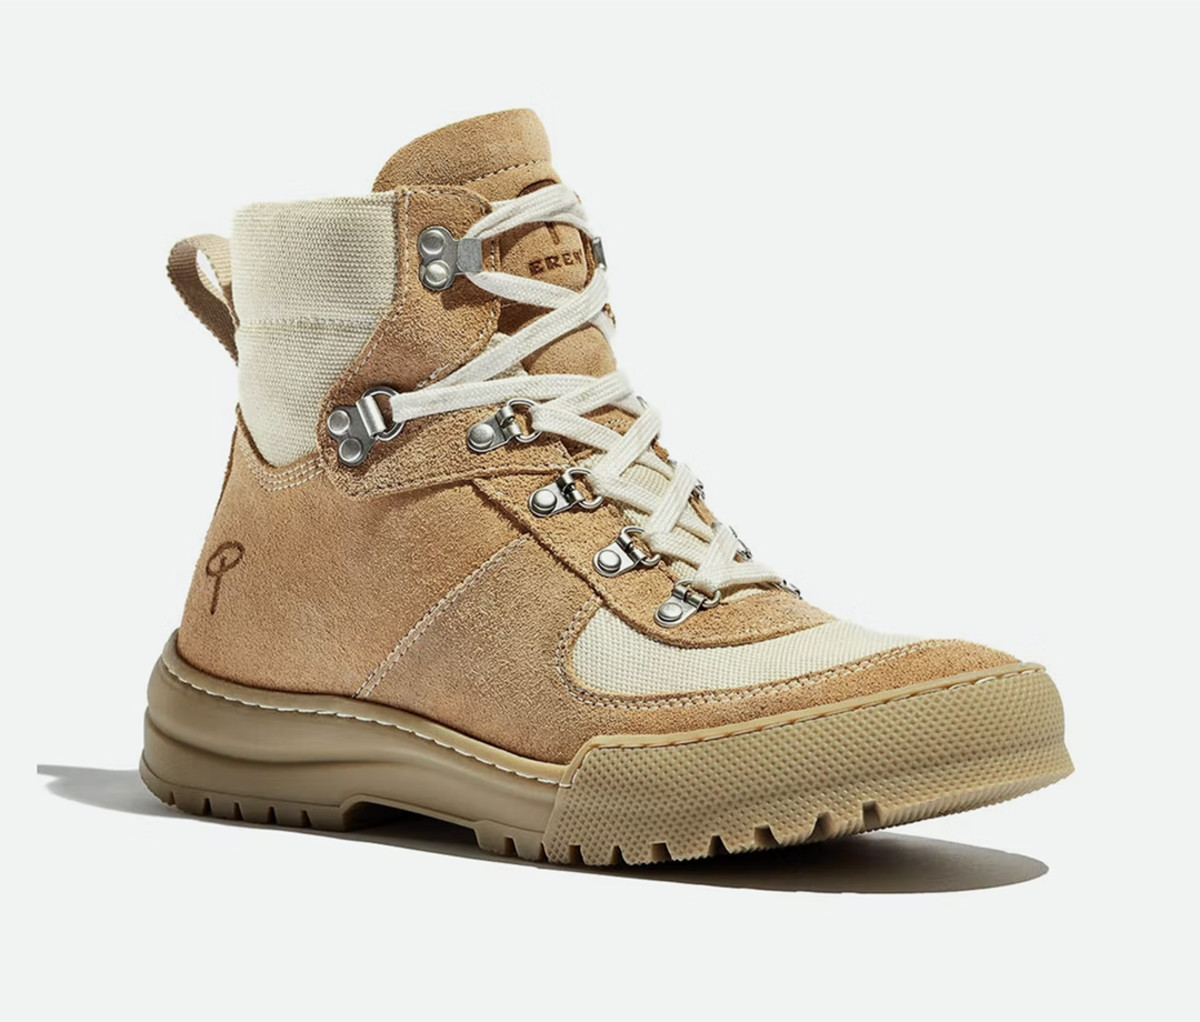 Hit The Trails in Comfort and Style With These Erem Xerocole Hiking ...